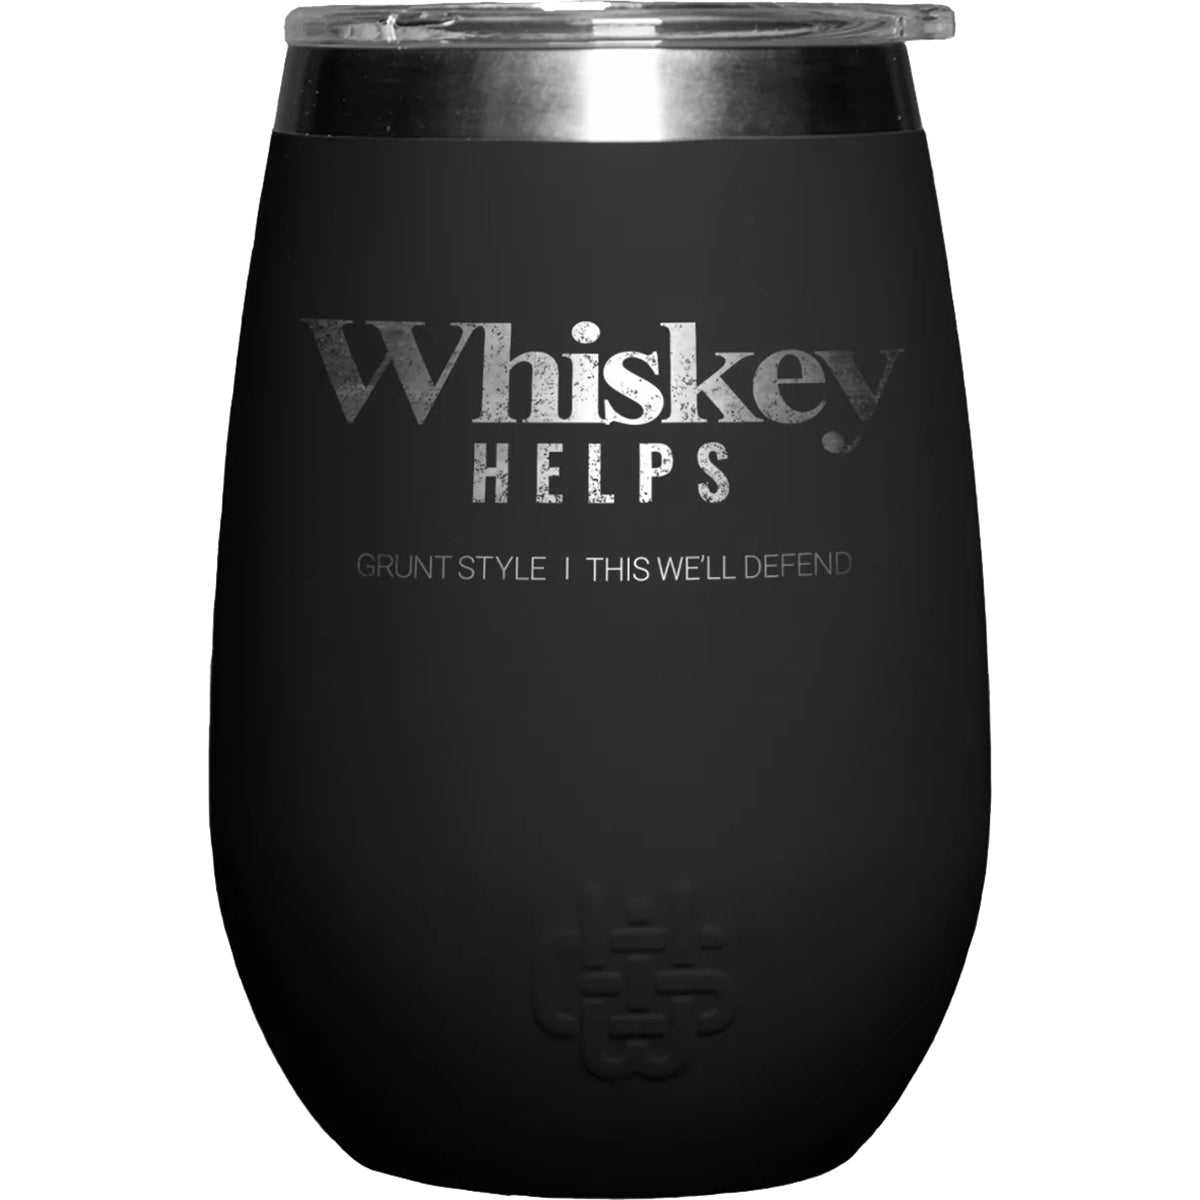 Grunt Style 12 oz. Whiskey Helps Insulated Stainless Steel Tumbler - Black Grunt Style